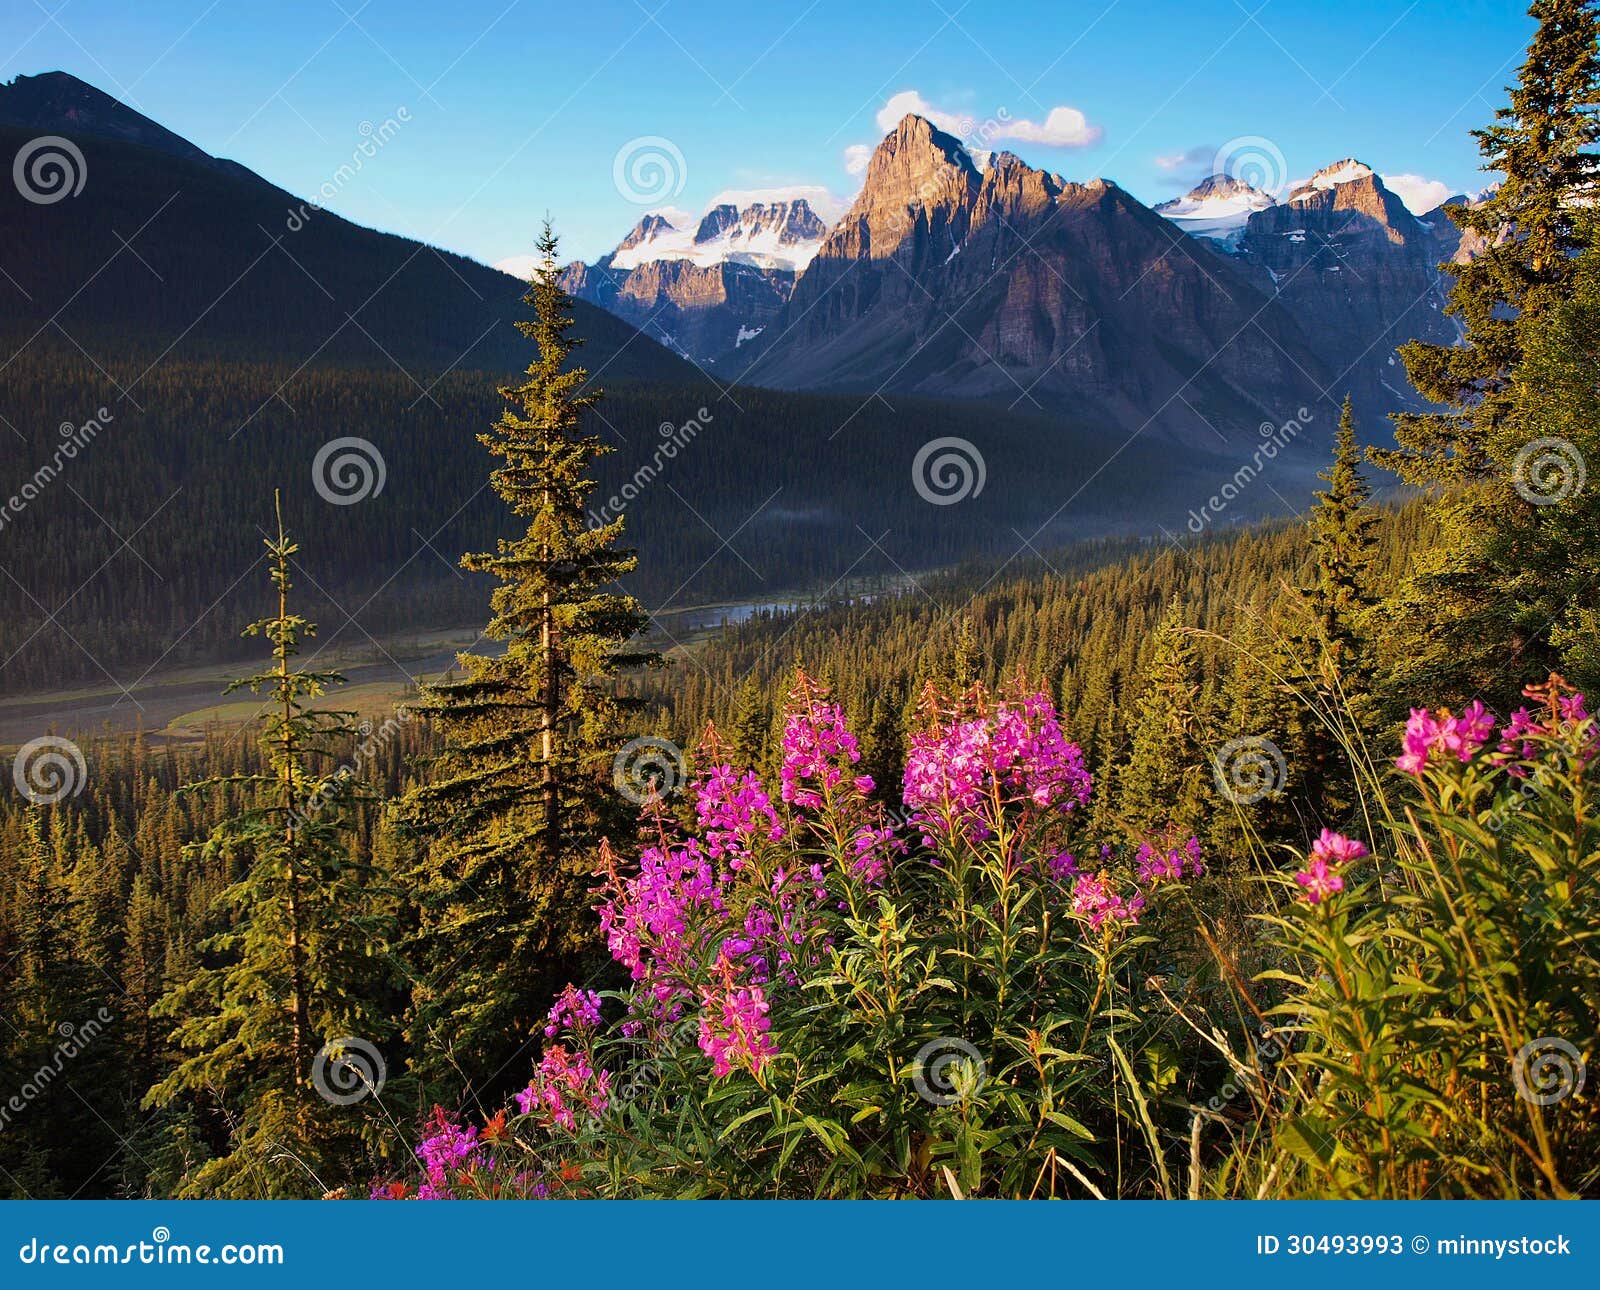 beautiful landscape with rocky mountains at sunset in banff national park, alberta, canada